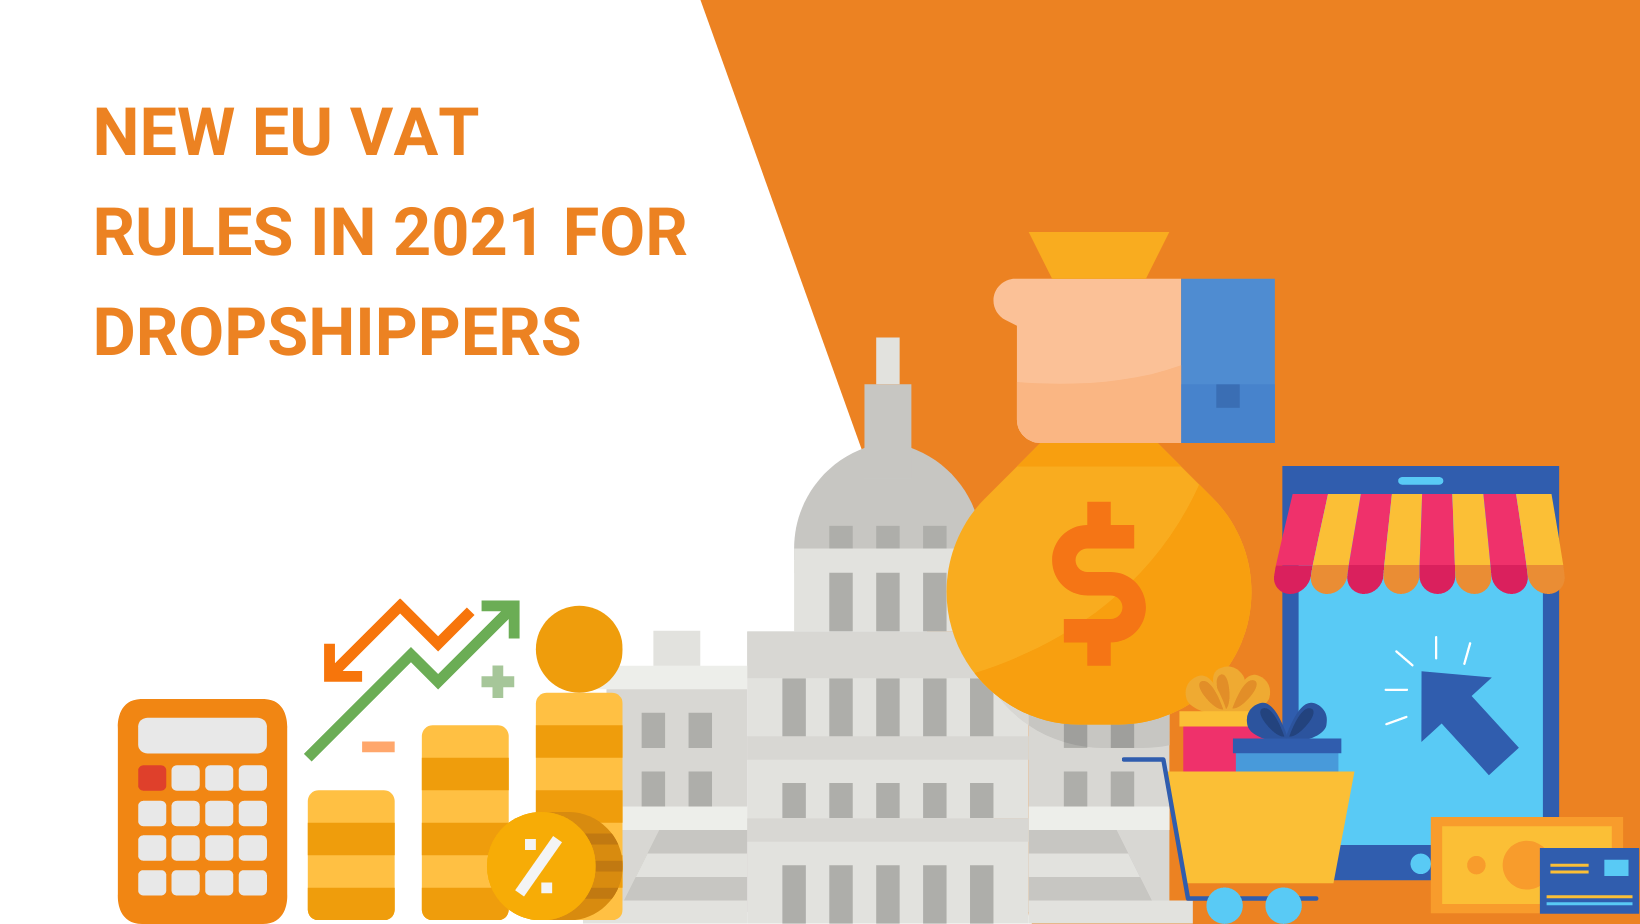 NEW EU VAT RULES IN 2021 FOR DROPSHIPPERS